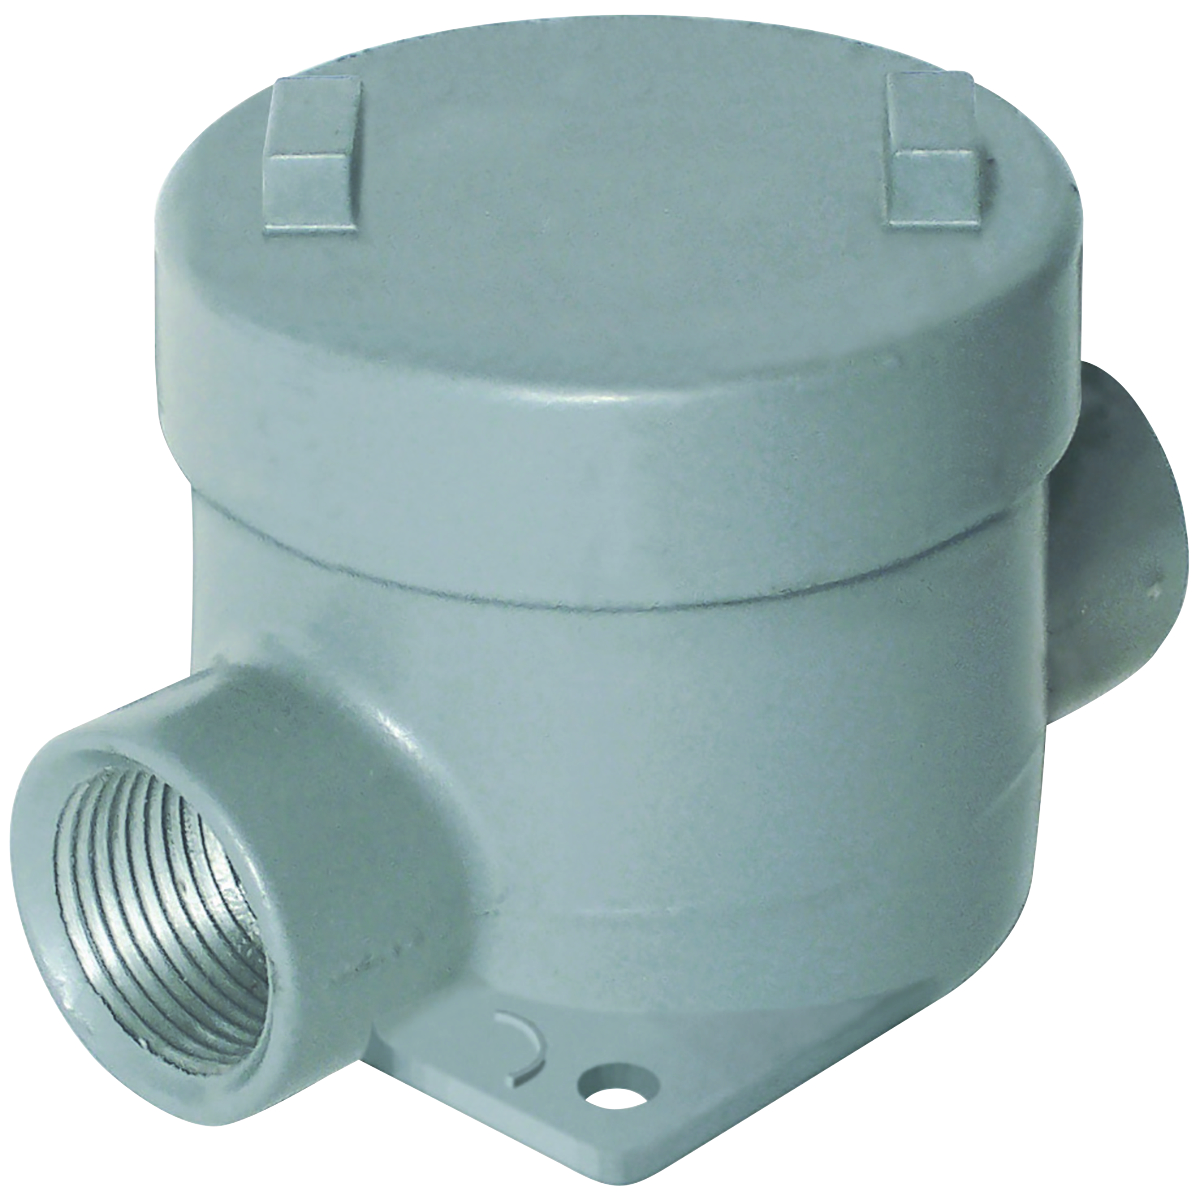 GEB SERIES - ALUMINUM OUTLET BODY - C TYPE - HUB SIZE 1-1/4 INCH -VOLUME 29.0 CUBIC INCHES